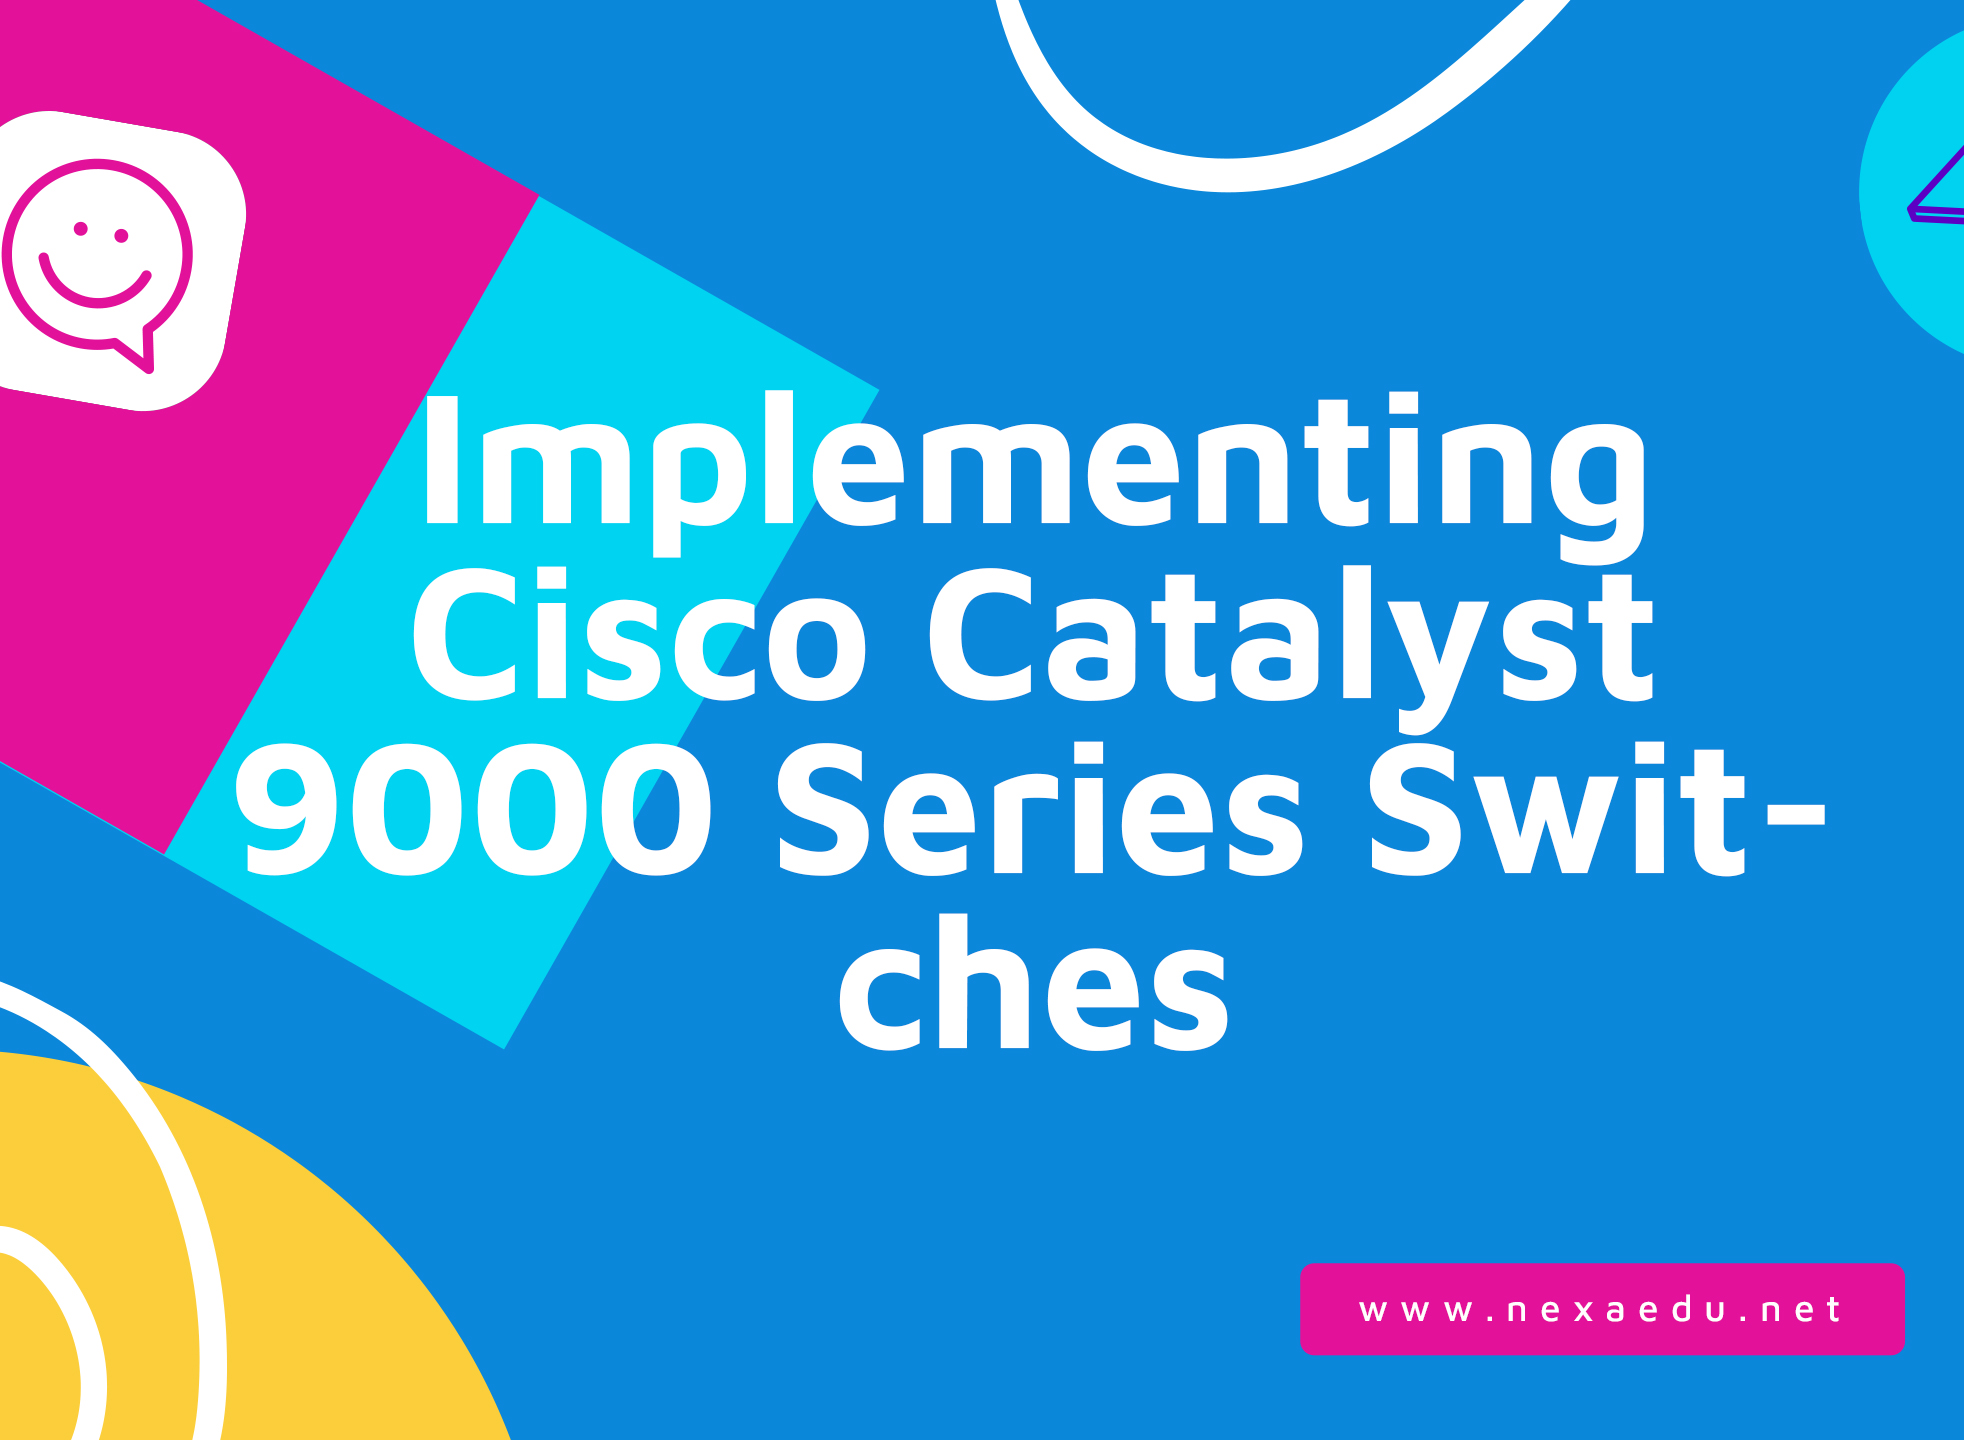 Implementing Cisco Catalyst 9000 Series Switches